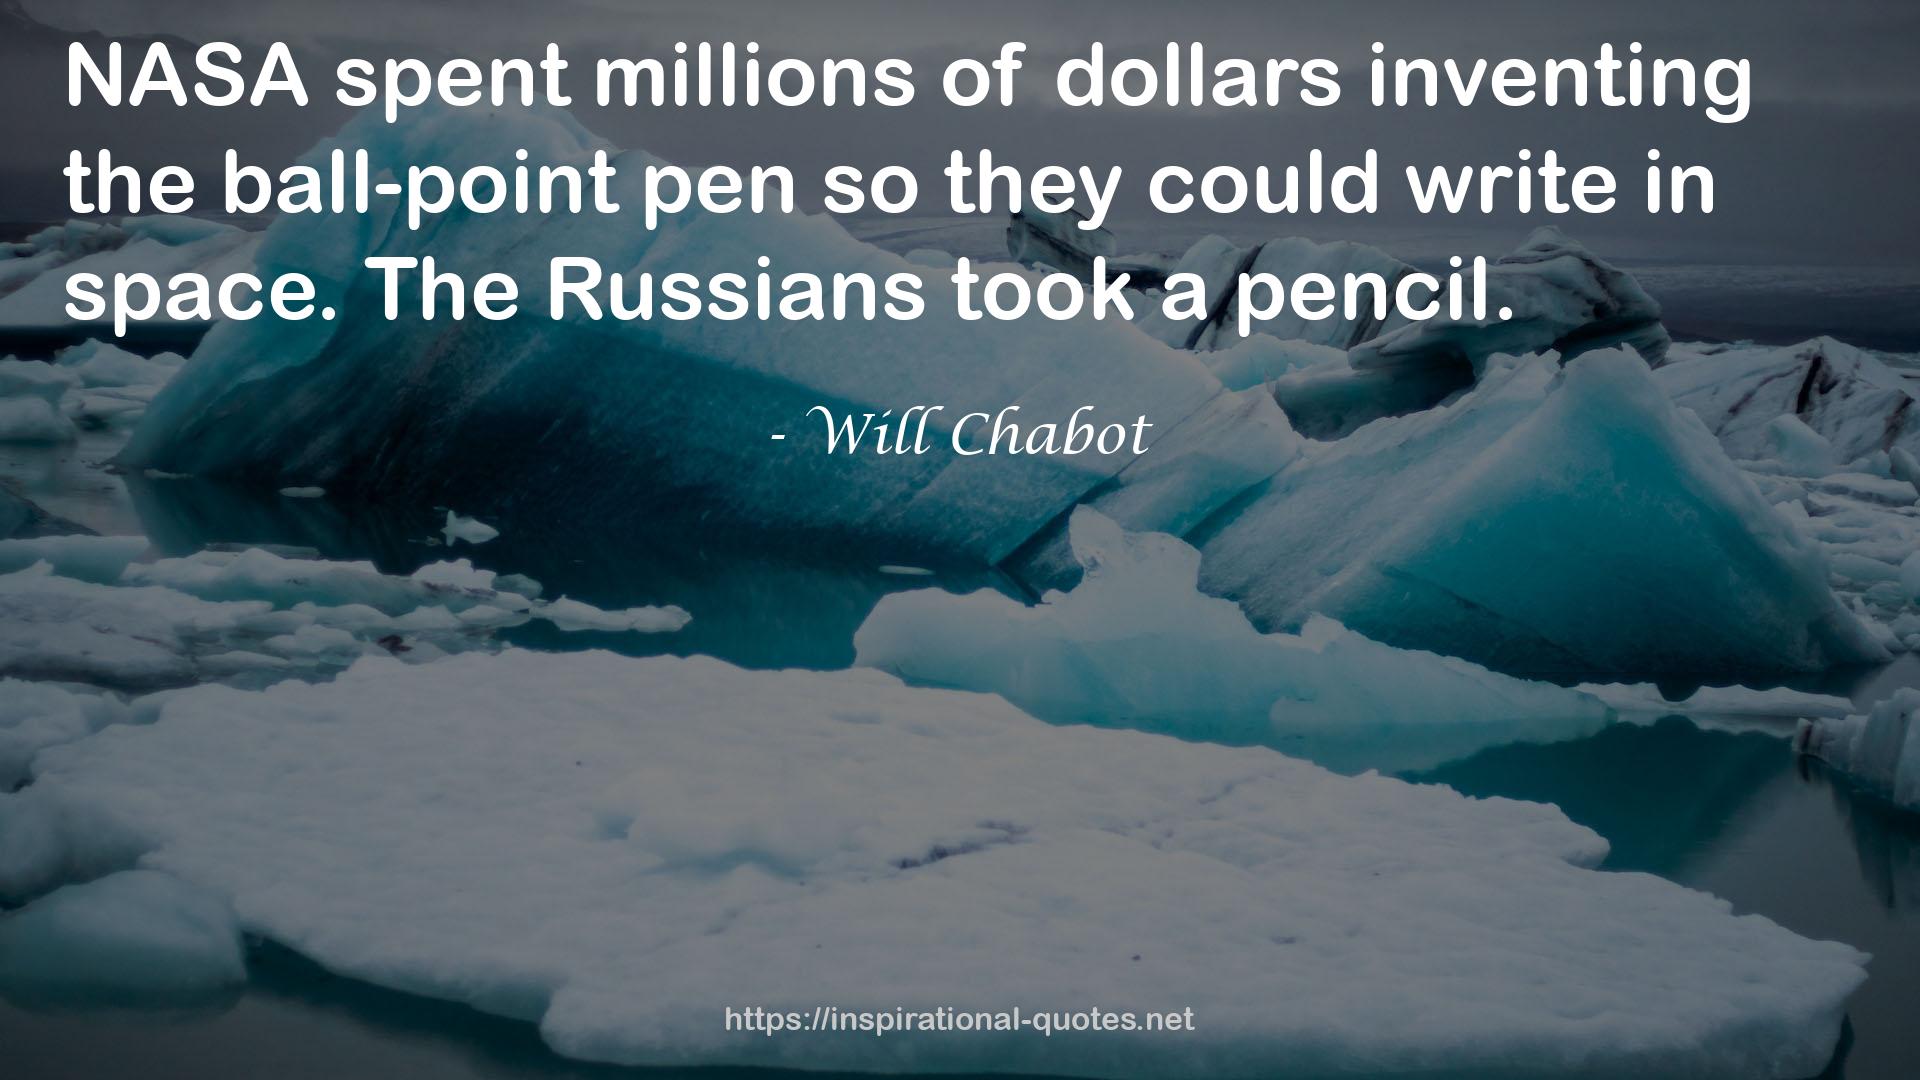 Will Chabot QUOTES